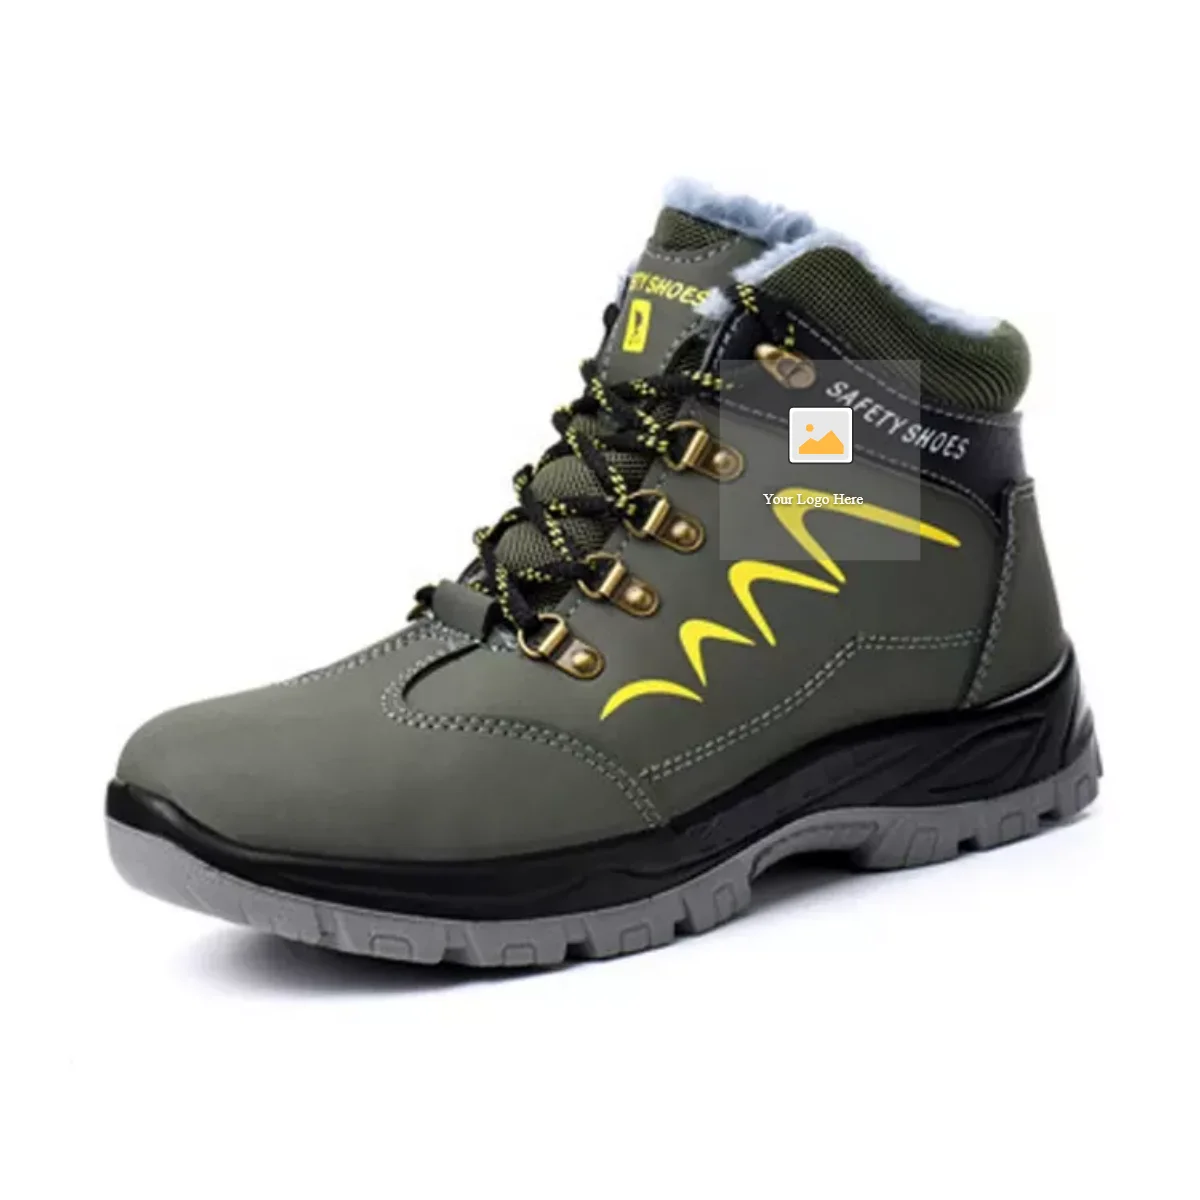 Mens Safety Work Shoes Steel Toe Cap Protective Hiking Sneakers Industrial Boots 